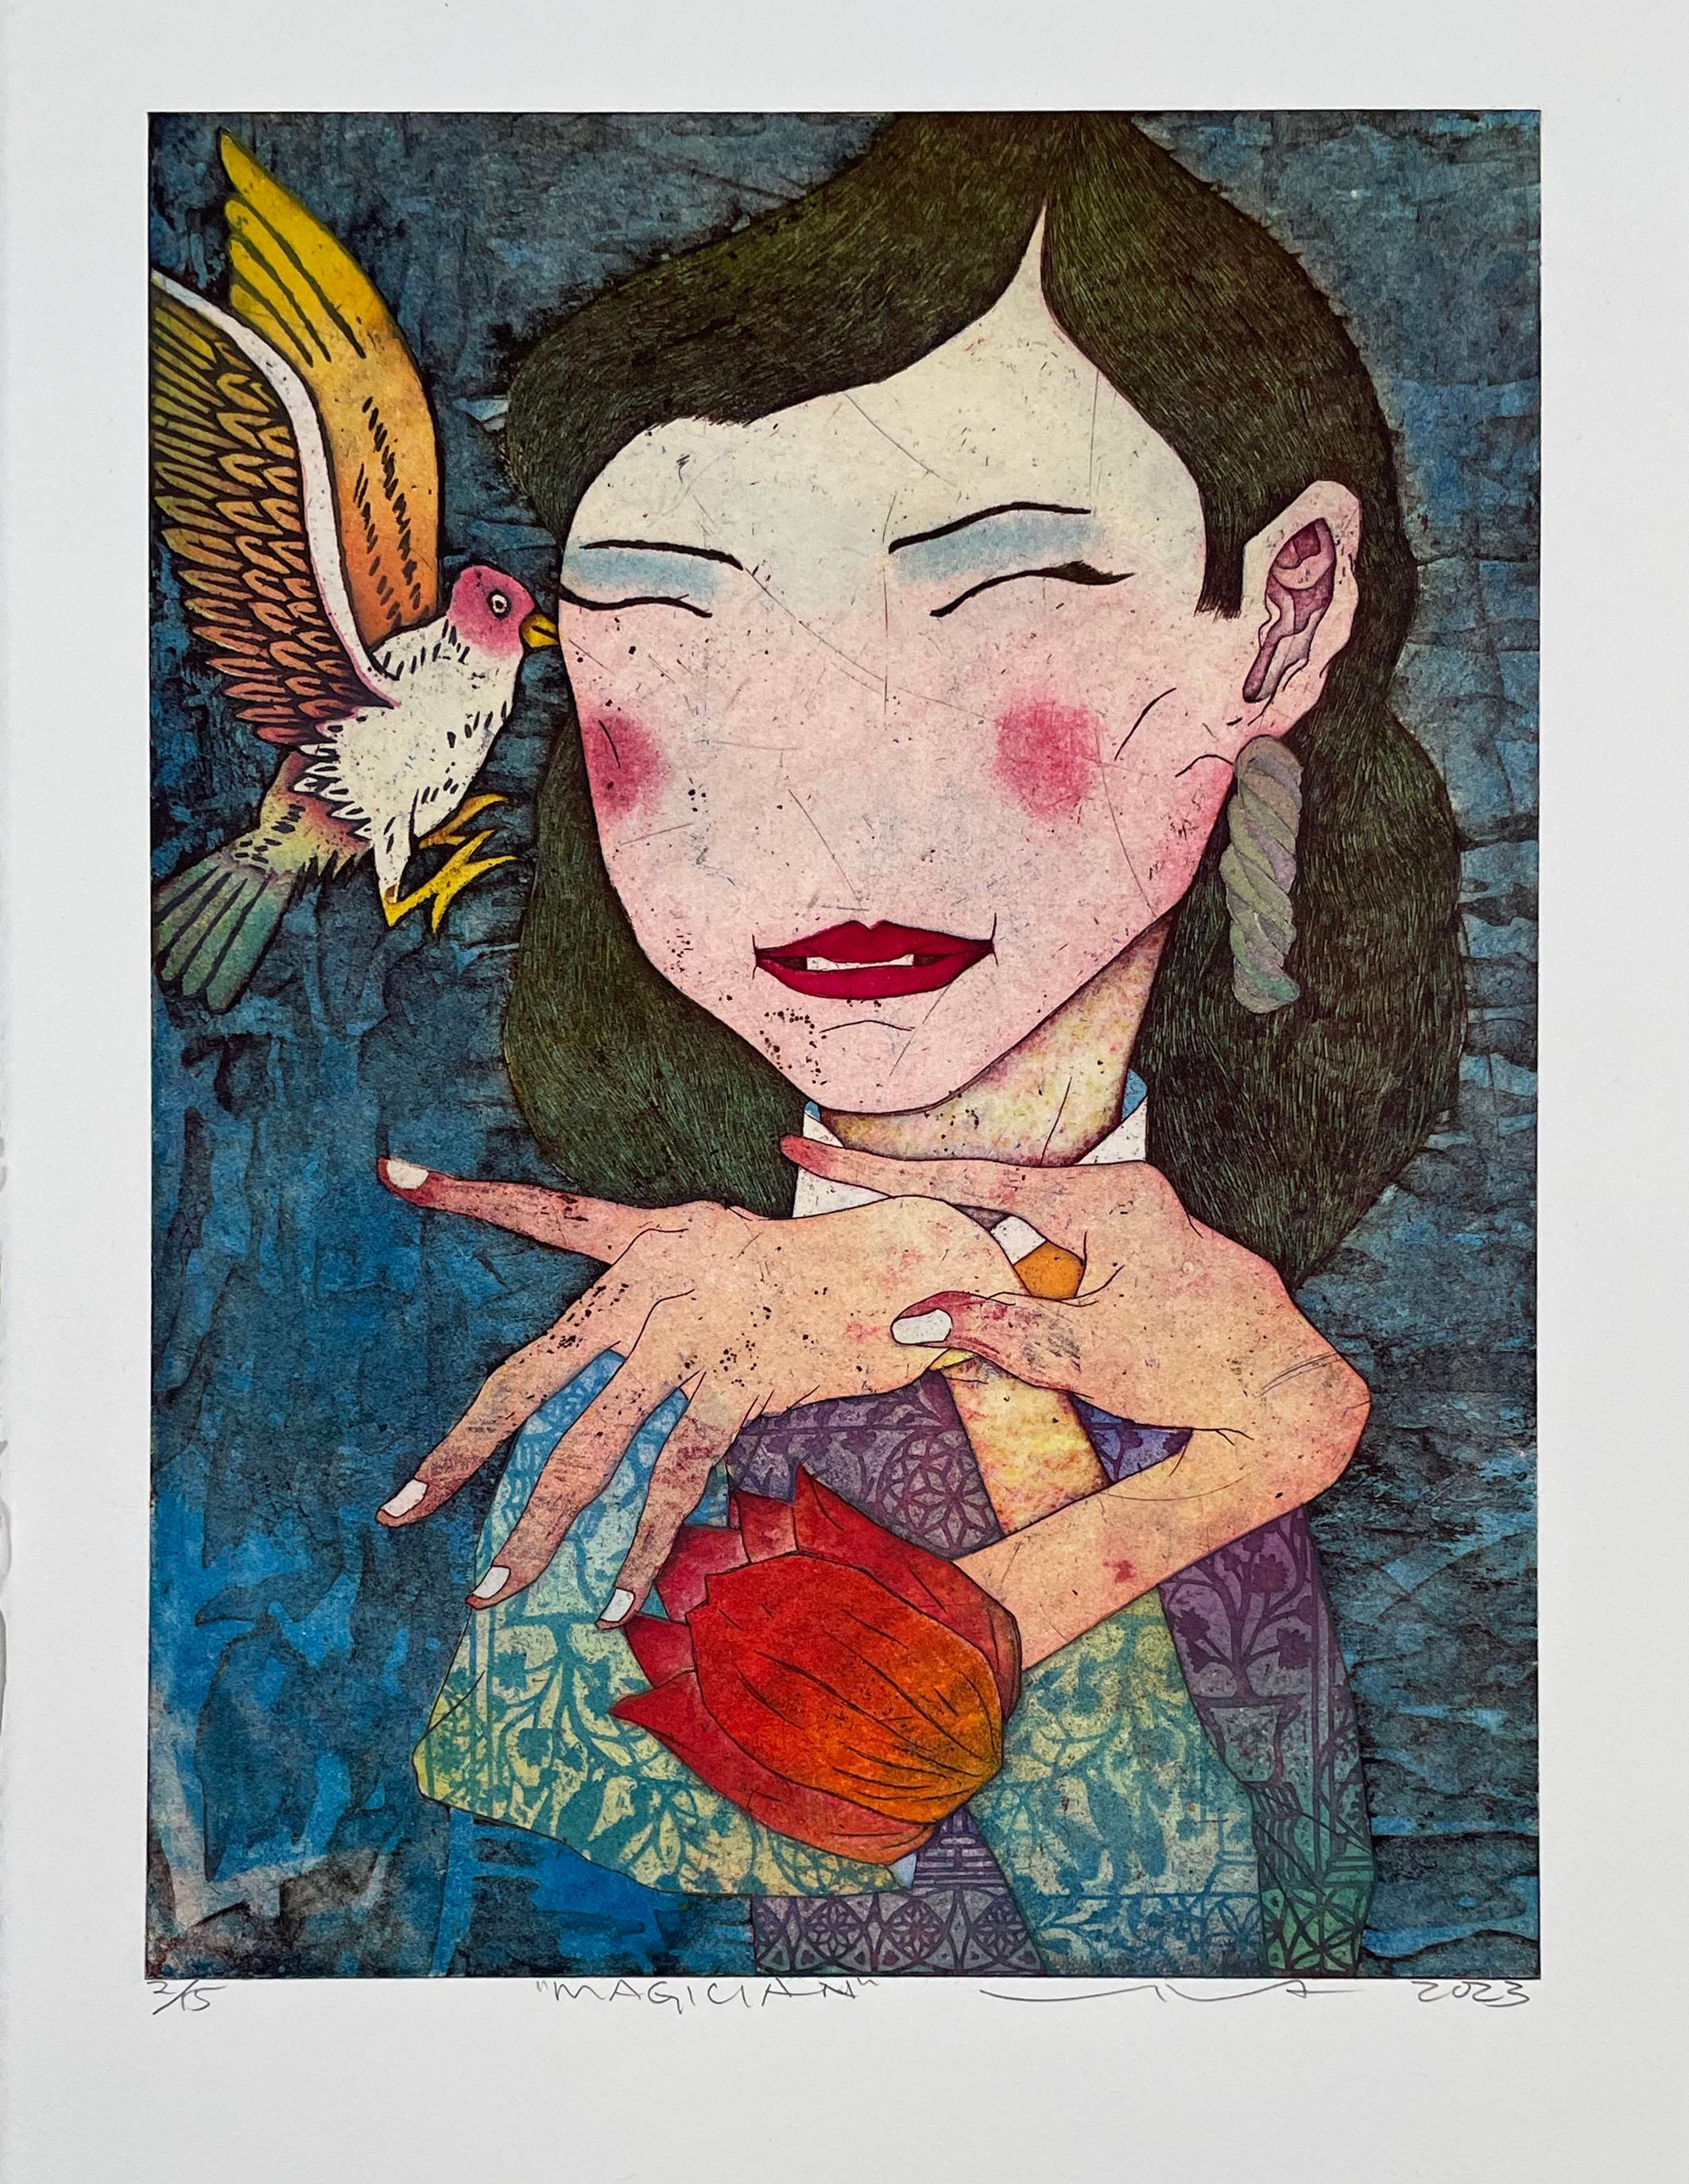 Signed and numbered from the edition of 15. Printed on Chine colle. Image of a young woman with her hands poised to make magic, with a large flower before her, and a bird whispering in her ear. While the images have some resemblance to traditional